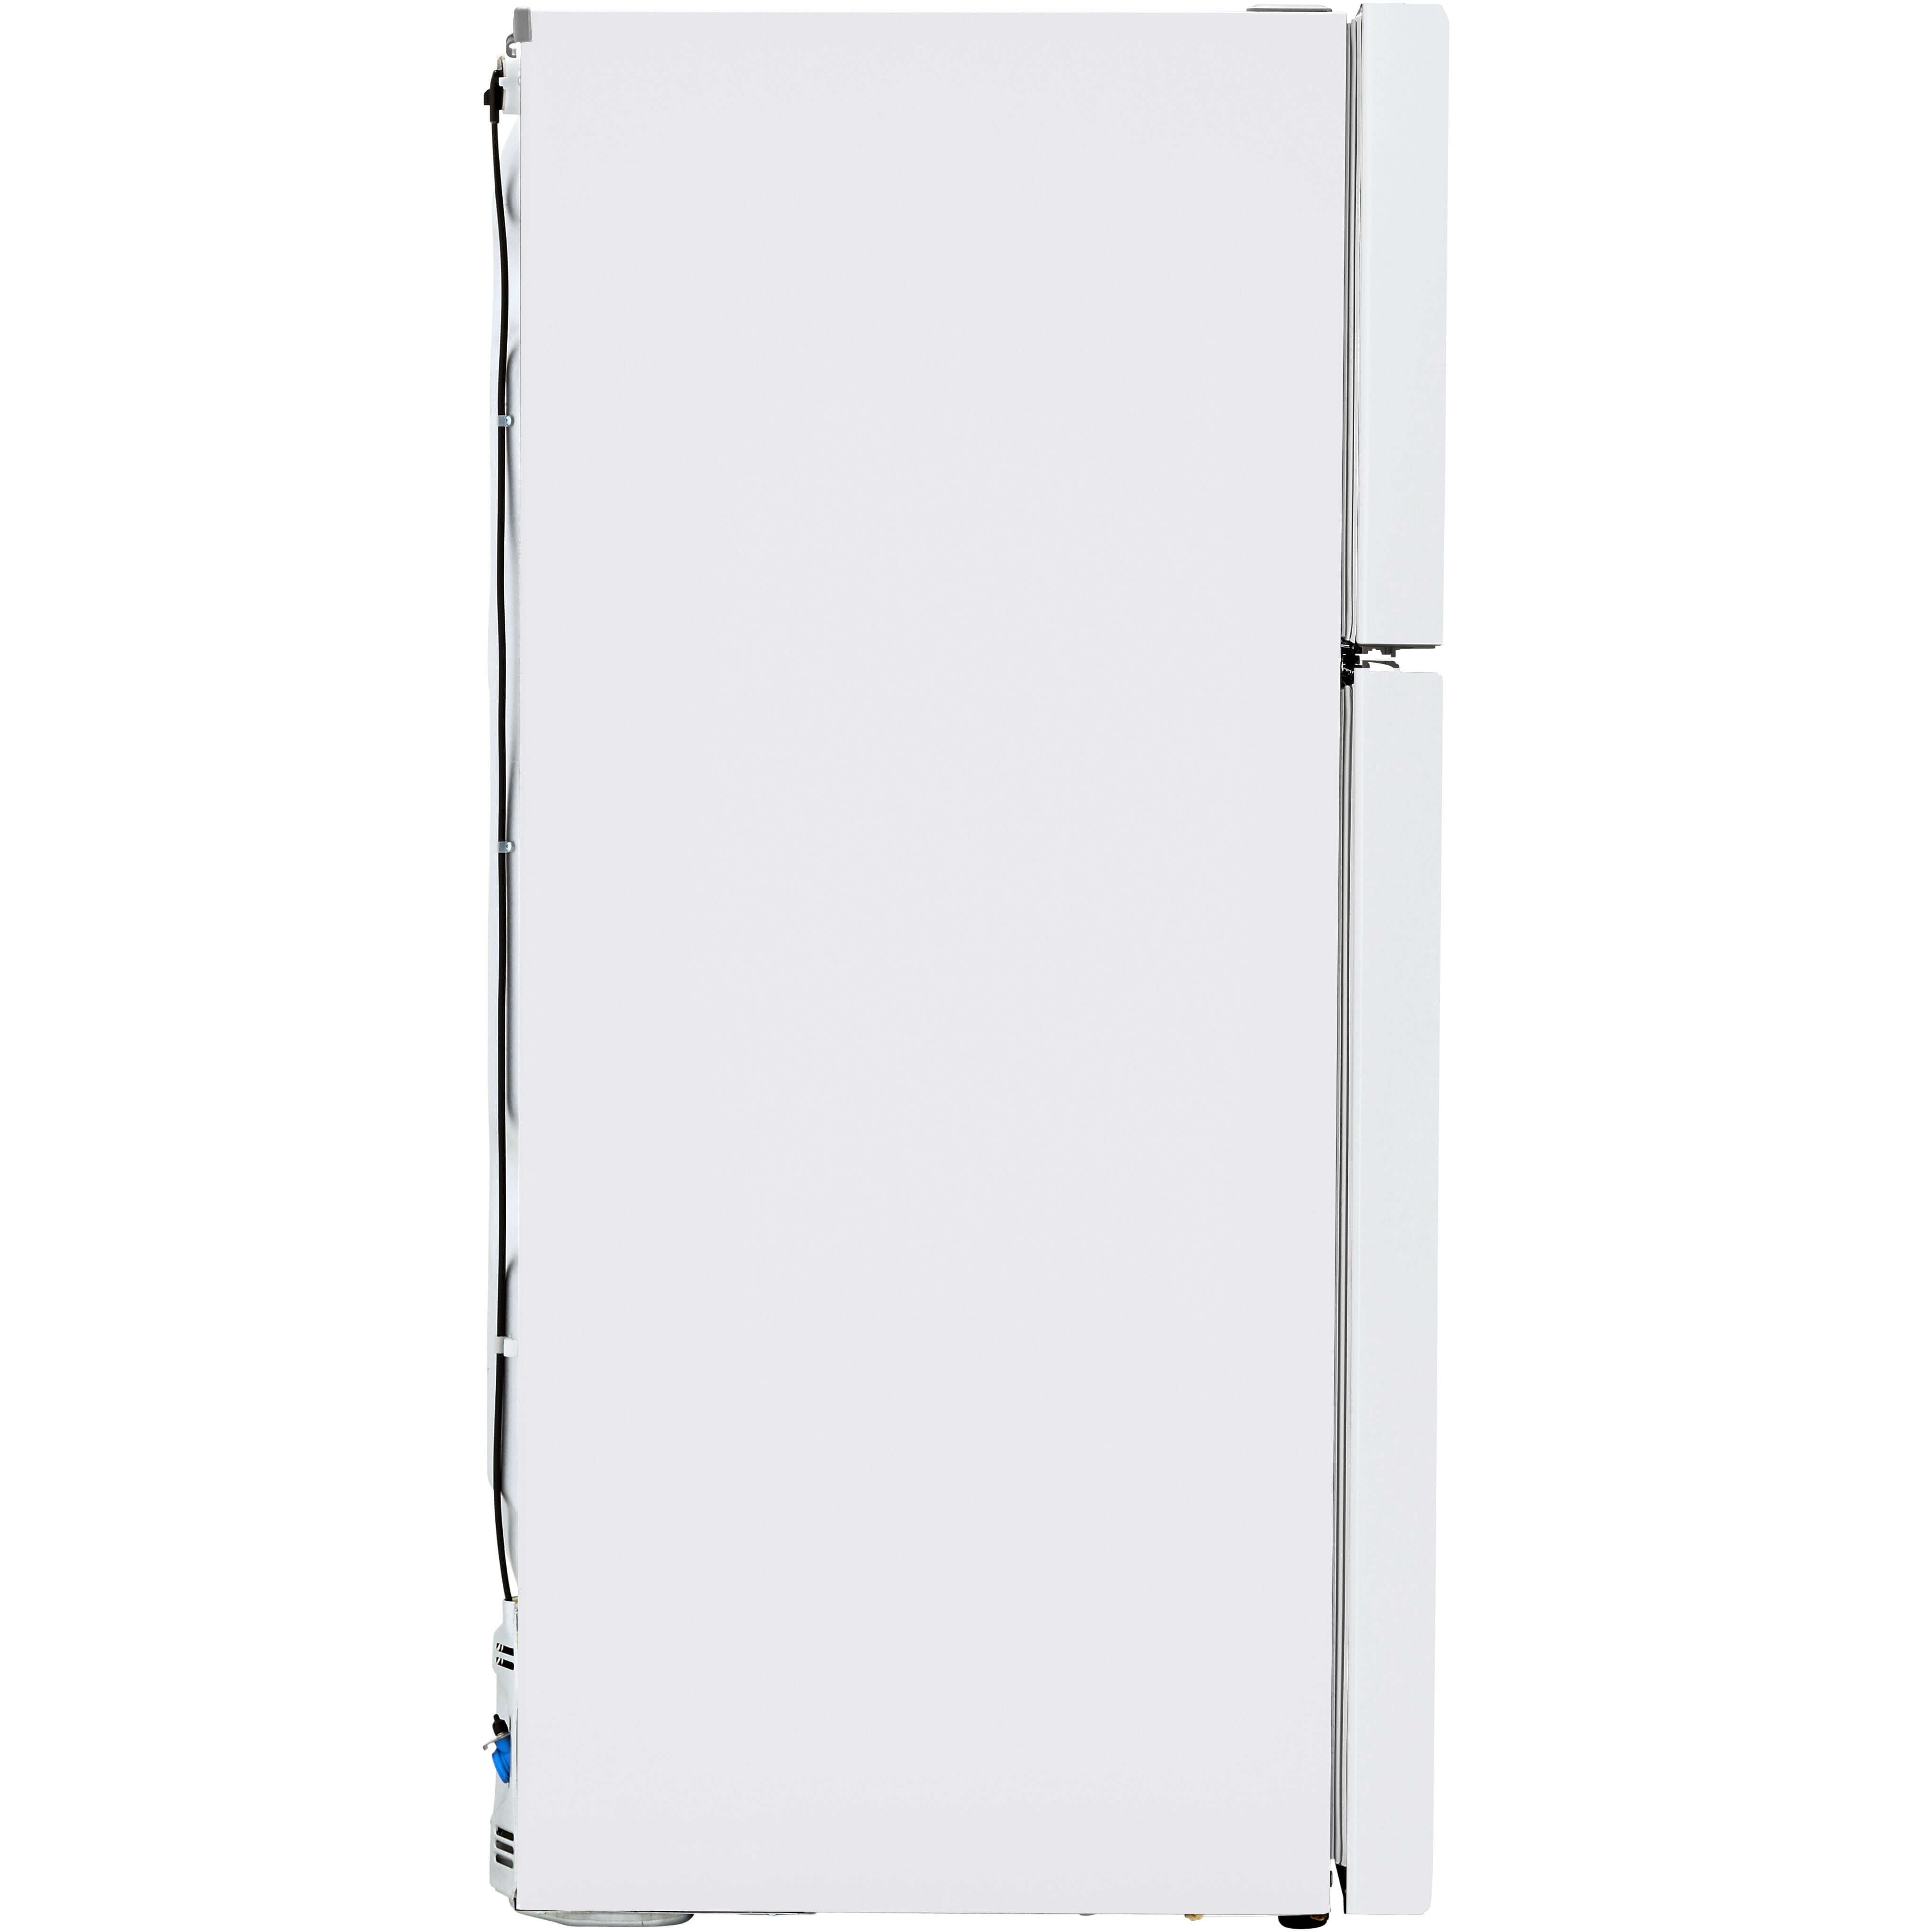 LG 30 Inch Top Mount Refrigerator in White 20 Cu. Ft. (LTCS20020W)